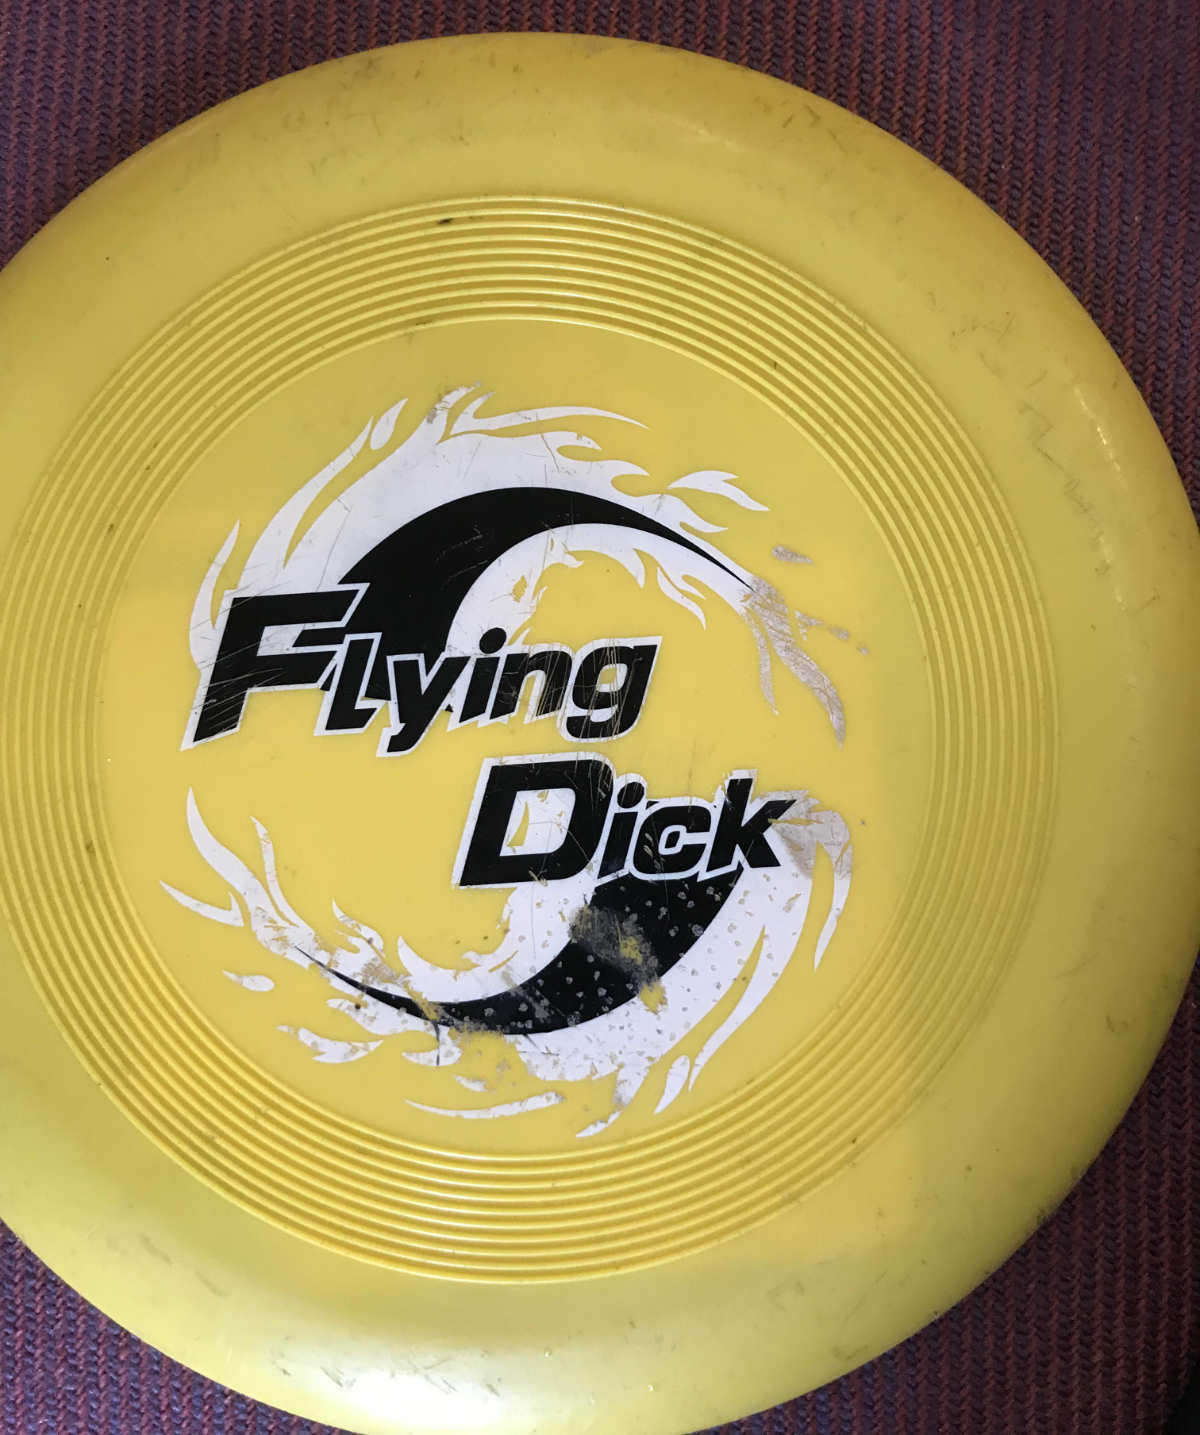 Ever been hit in the face by a flying dick...?